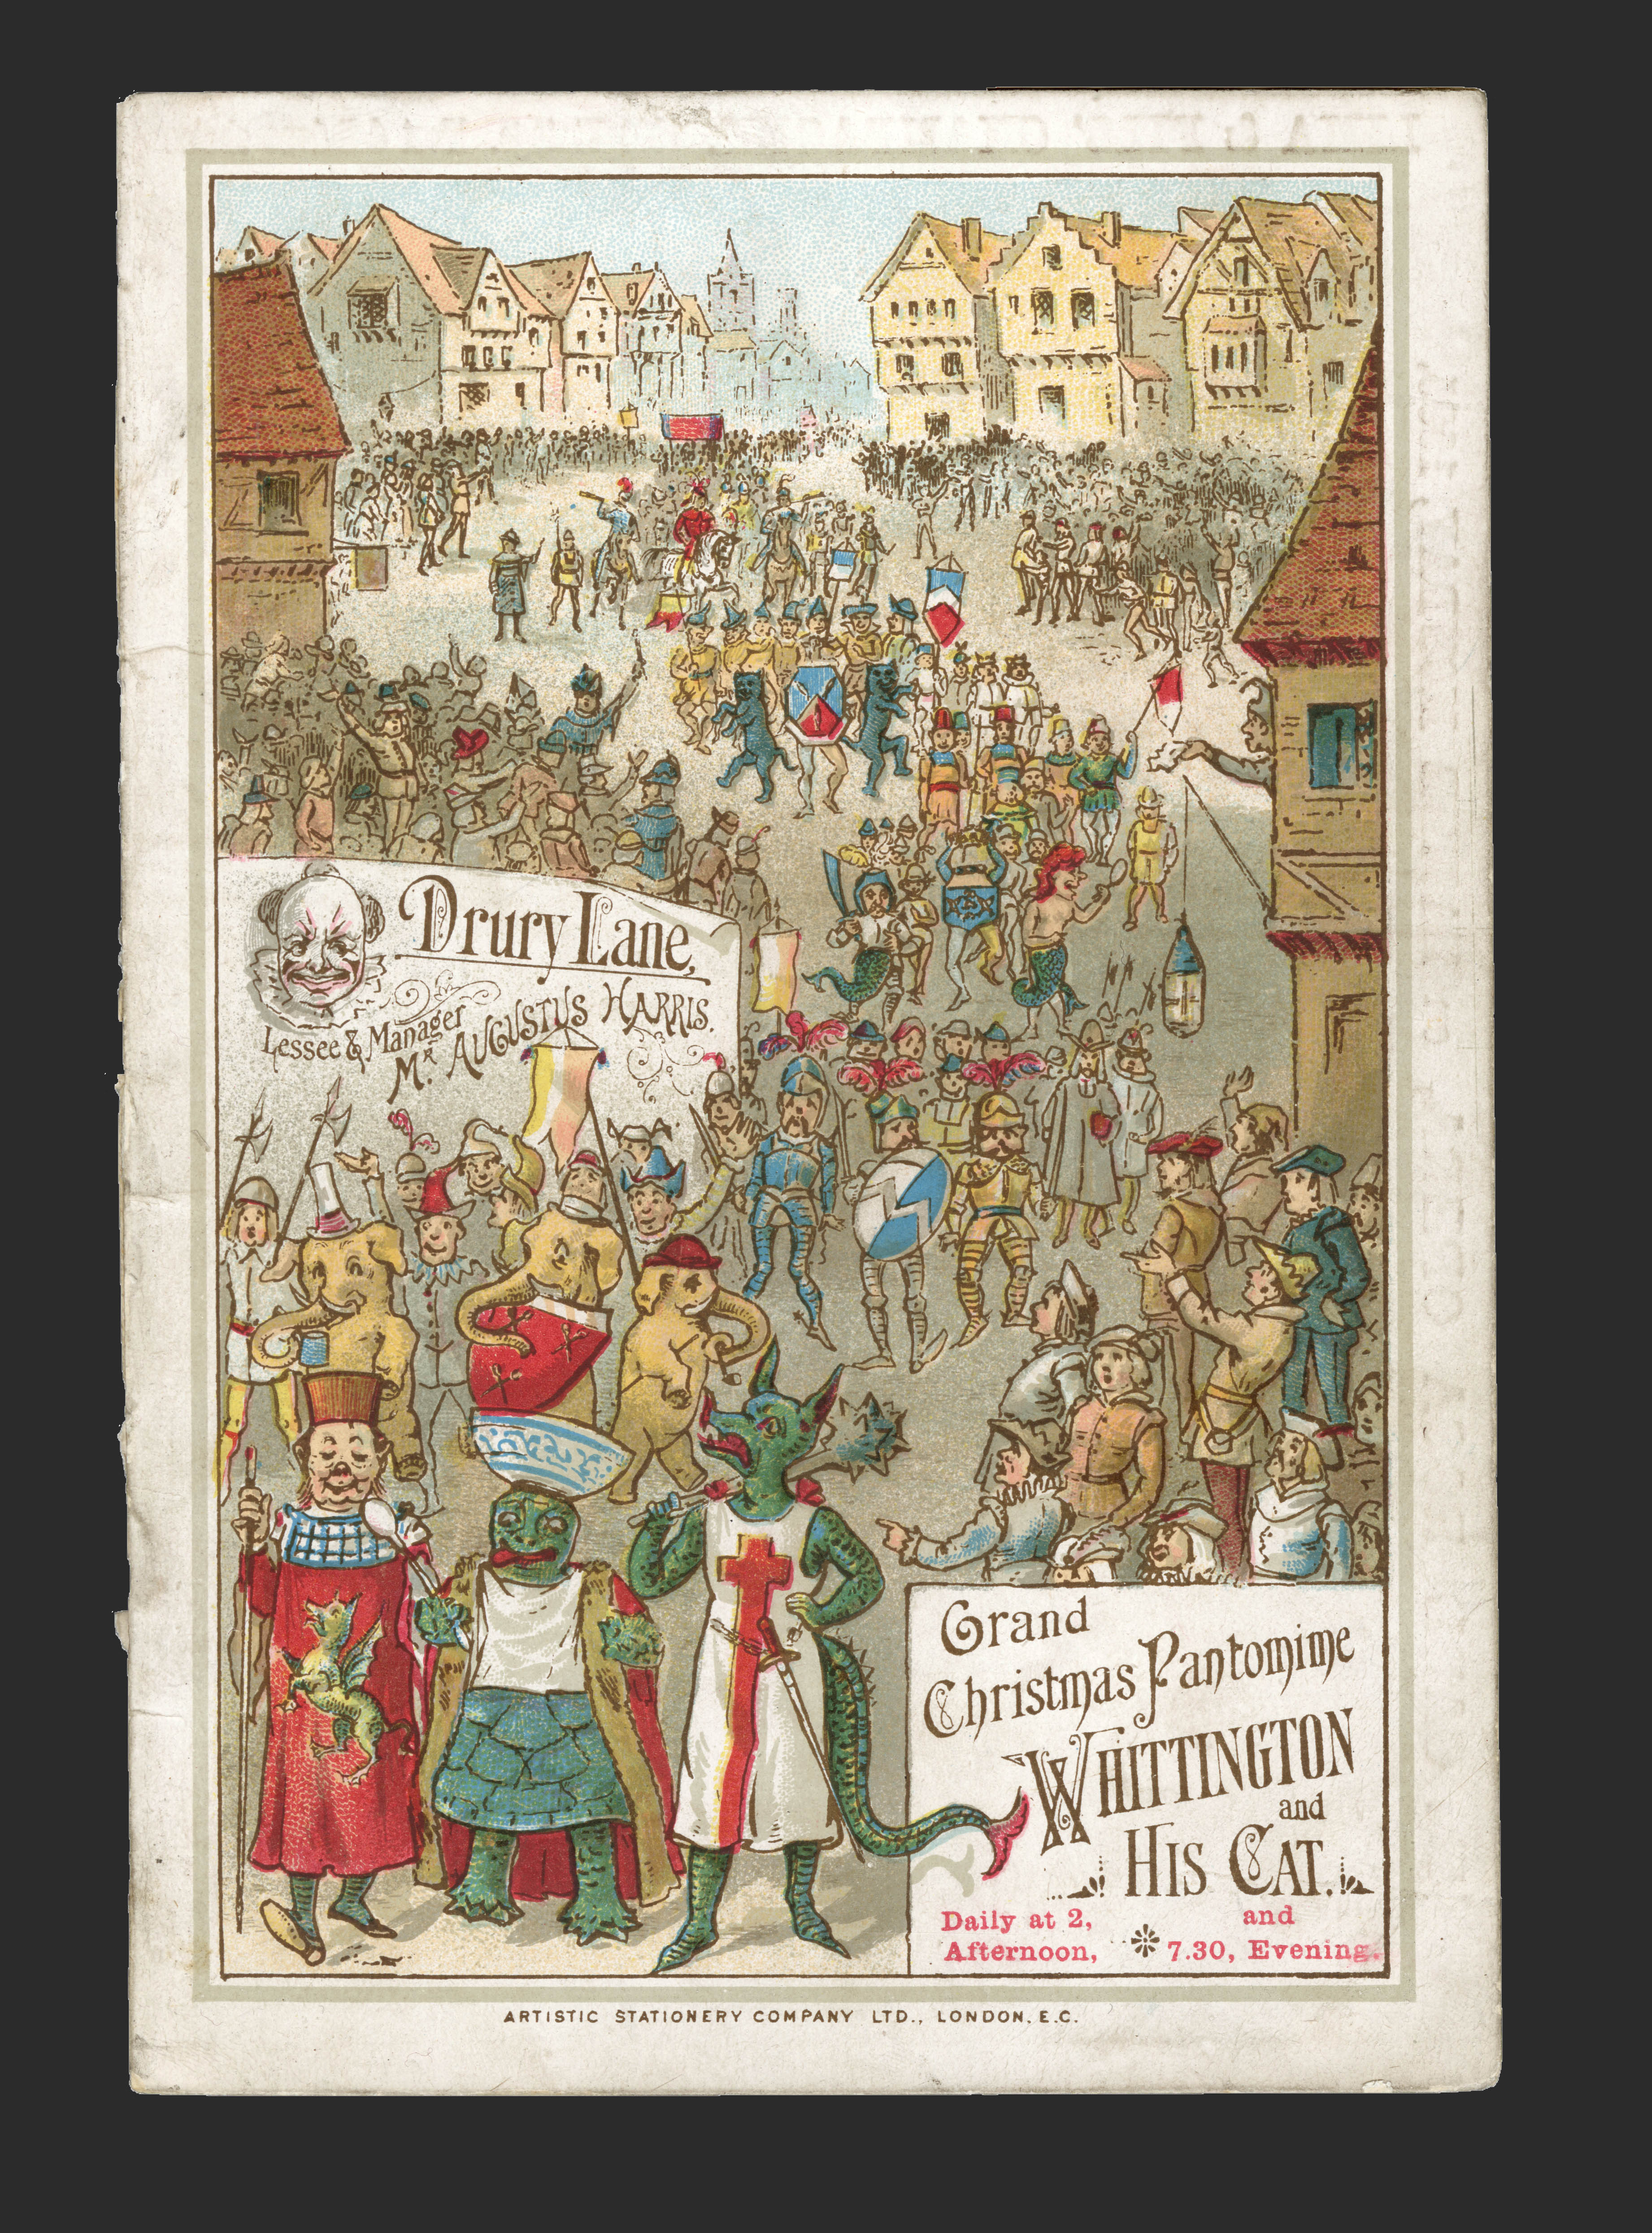 Programme for the pantomime Dick Whittington, performed at Drury Lane theatre. The lavishly illustrated cover depicts hoards of people parading through a traditional town street.